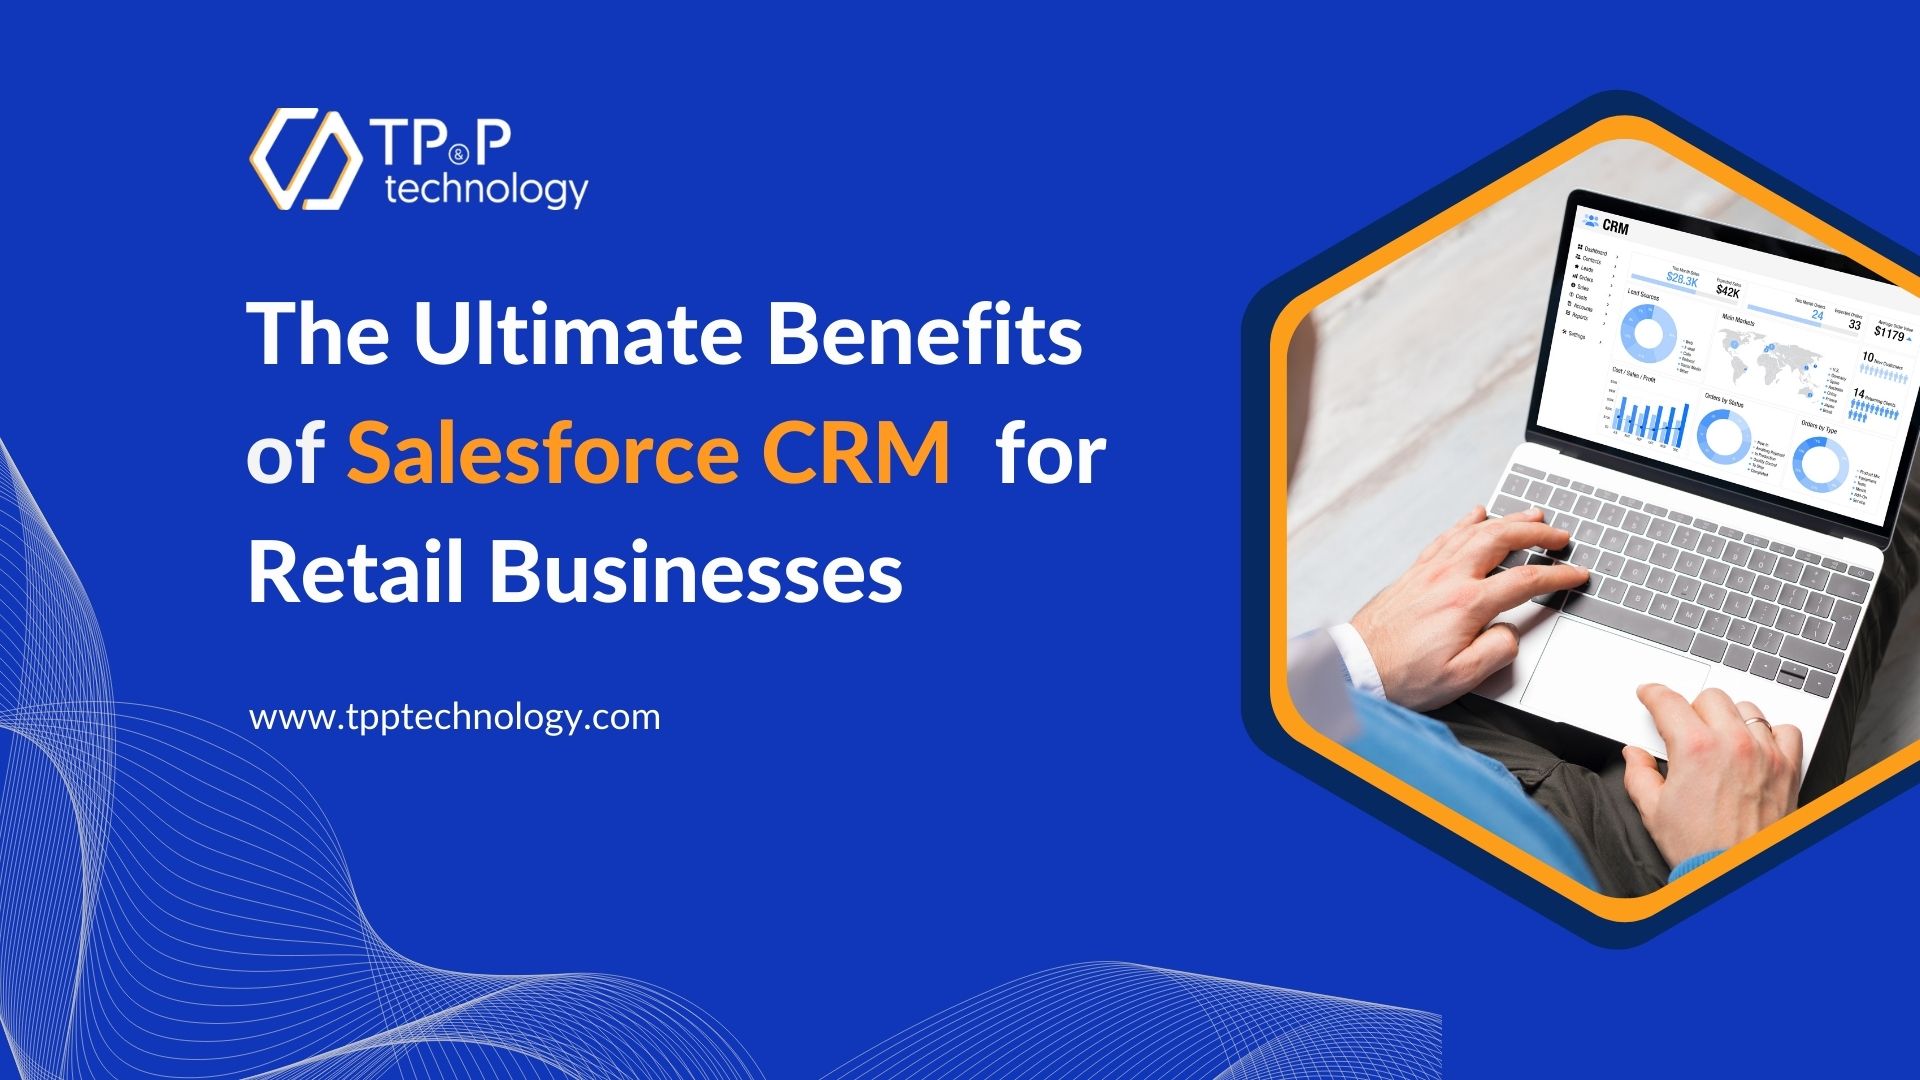 The Ultimate Benefits of Salesforce CRM for Retail Businesses